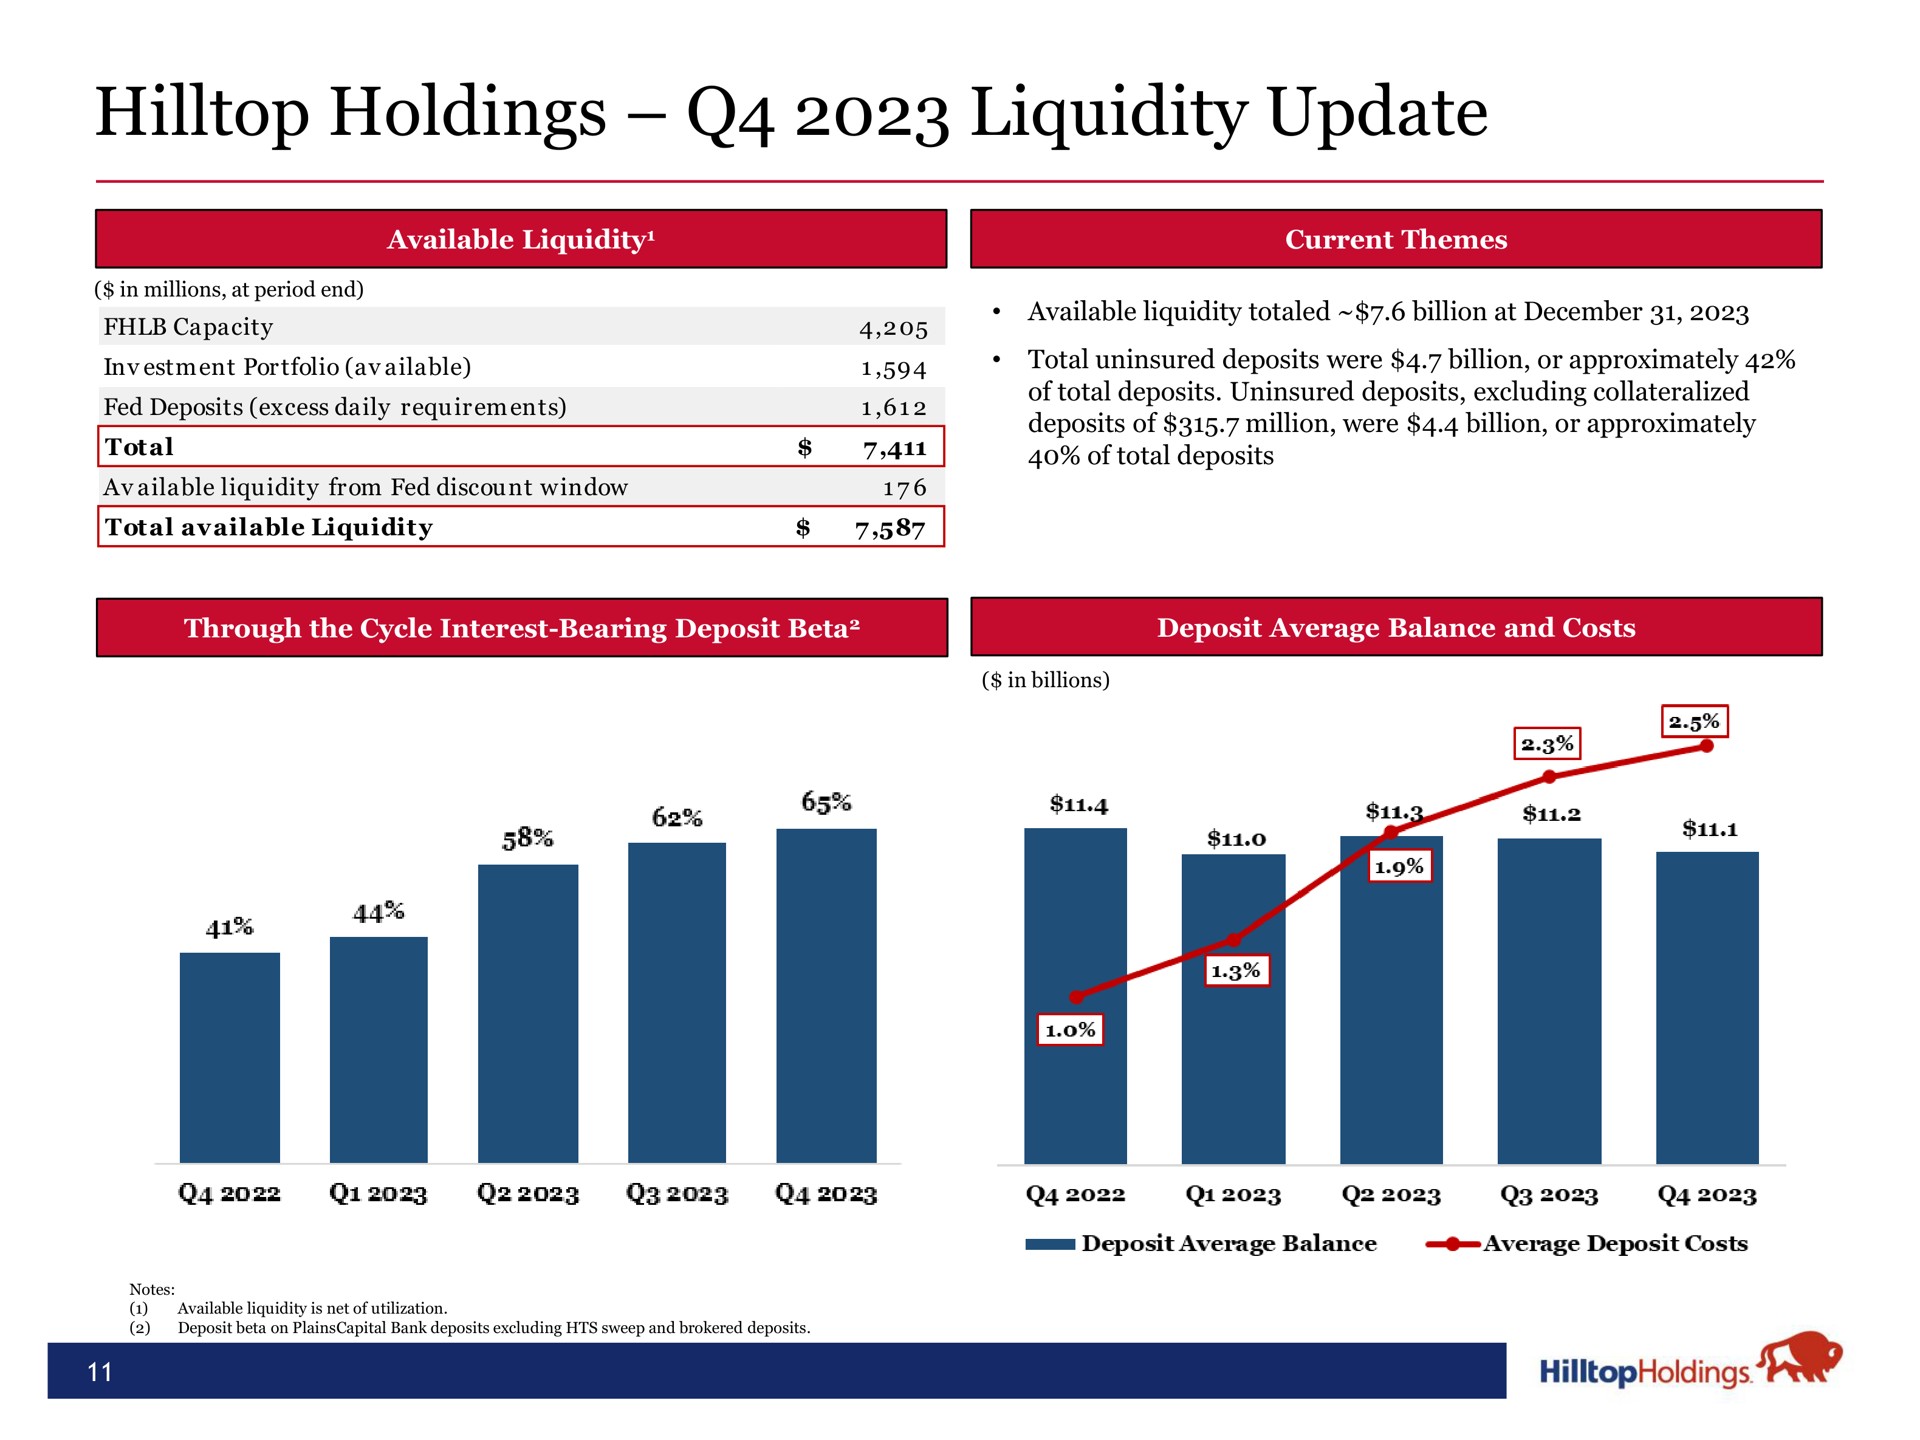 hilltop holdings liquidity update | Hilltop Holdings